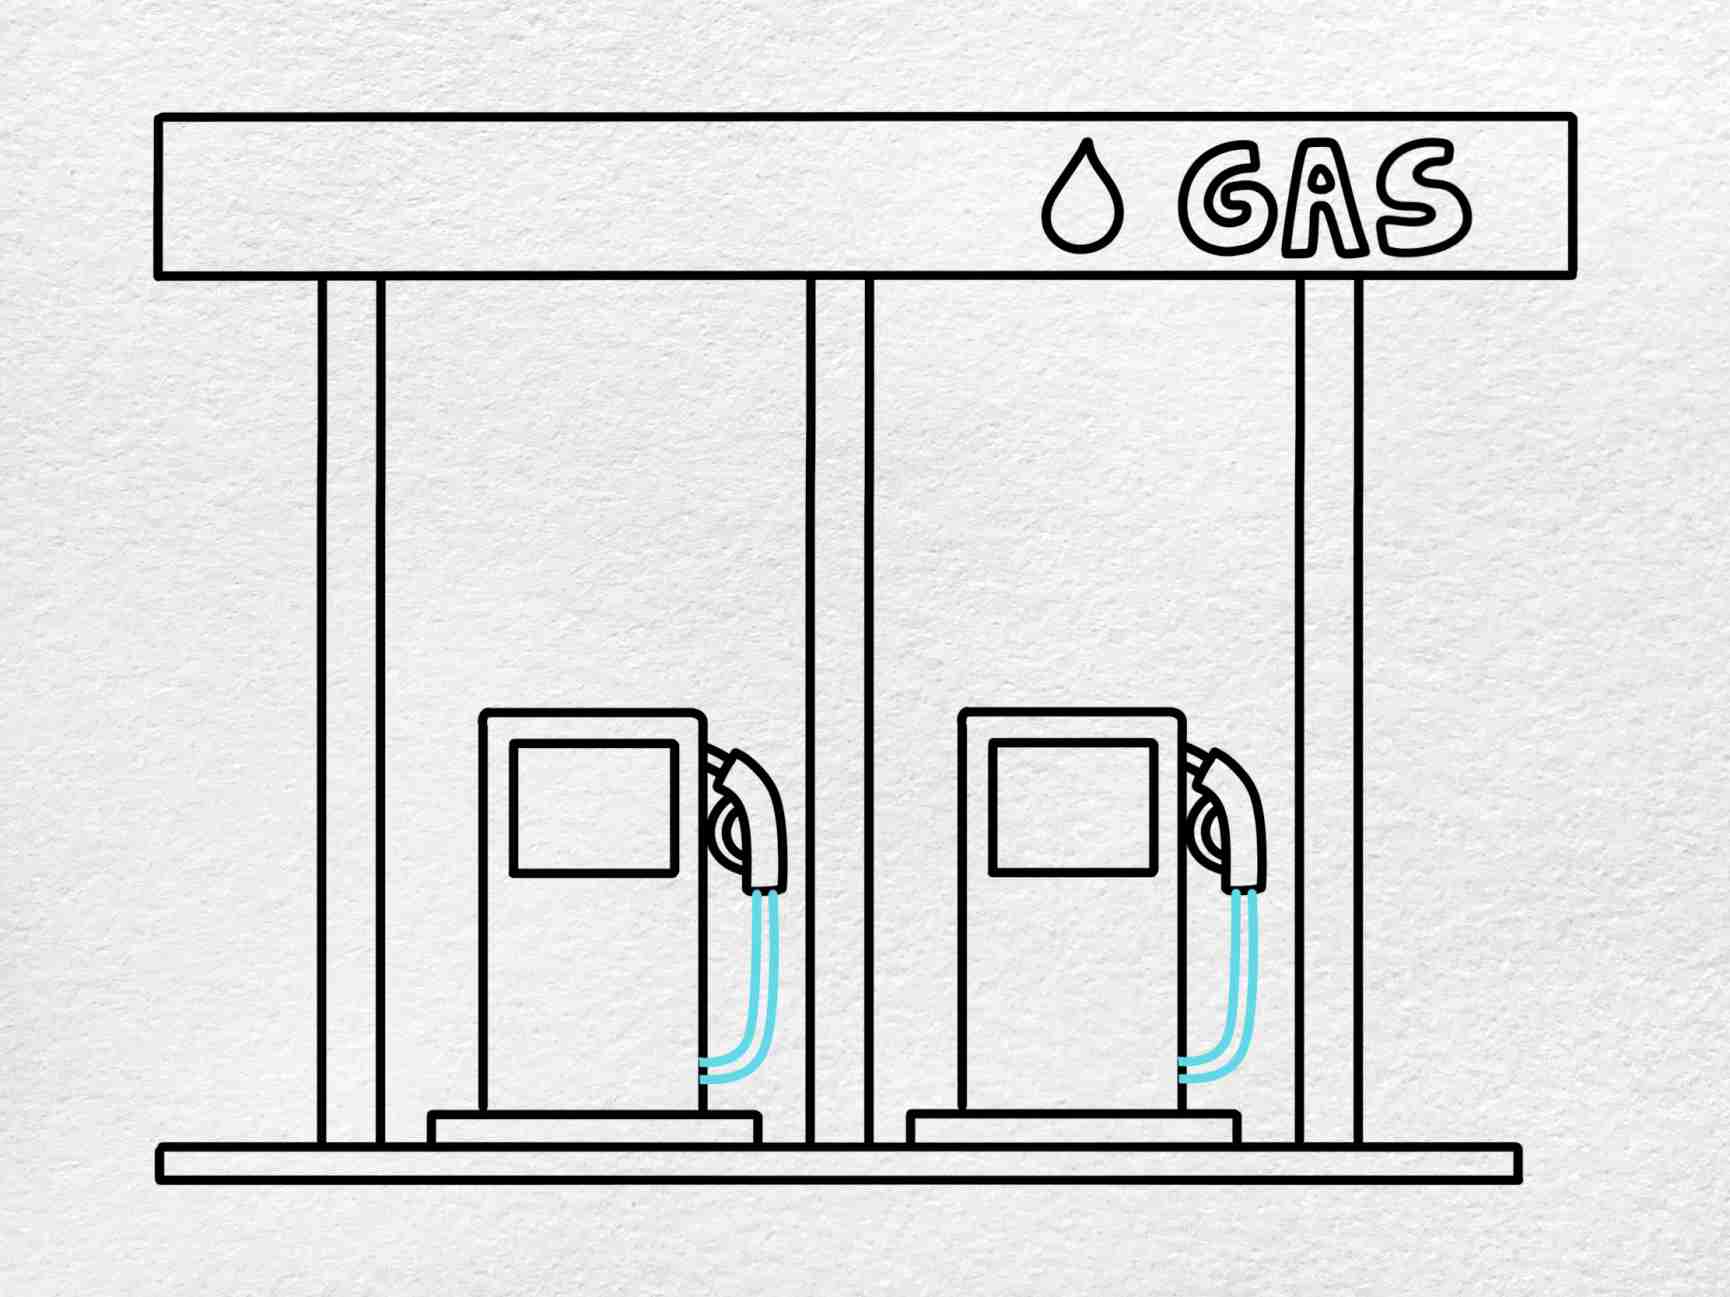 How to draw a gas station